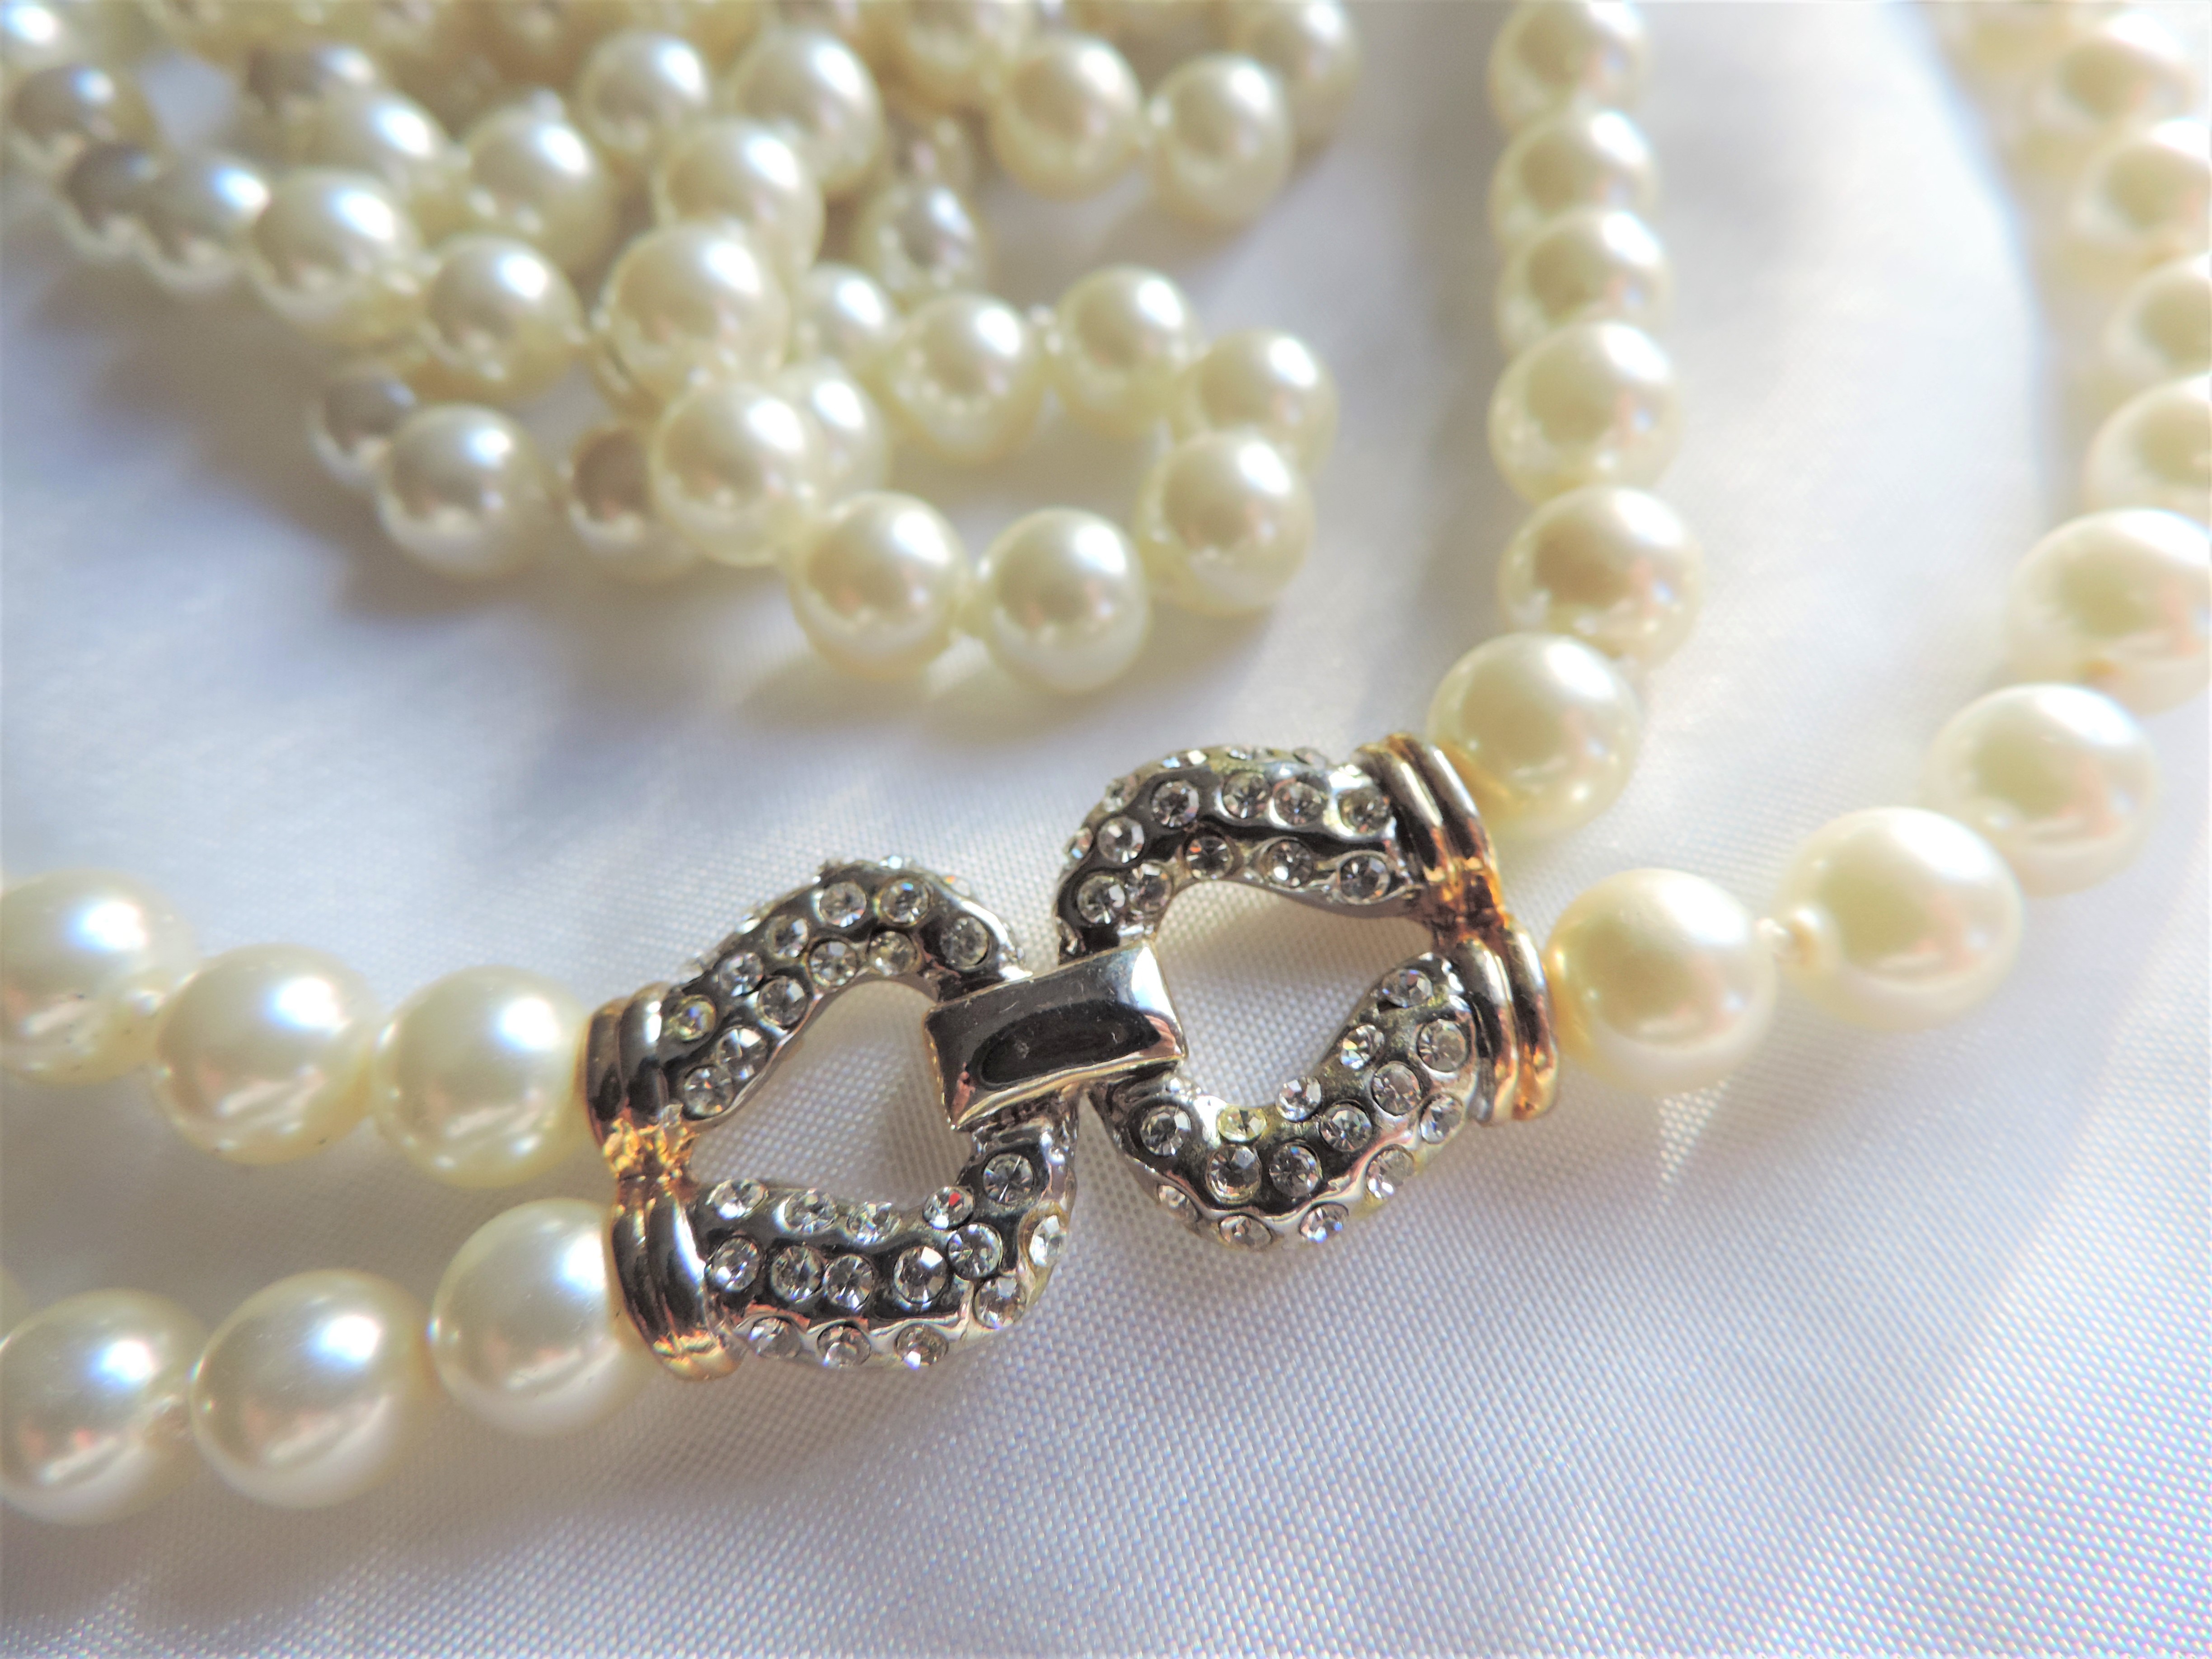 Double Strand Pearl Necklace Pearls 26"""" Long New with Gift Box - Image 3 of 4